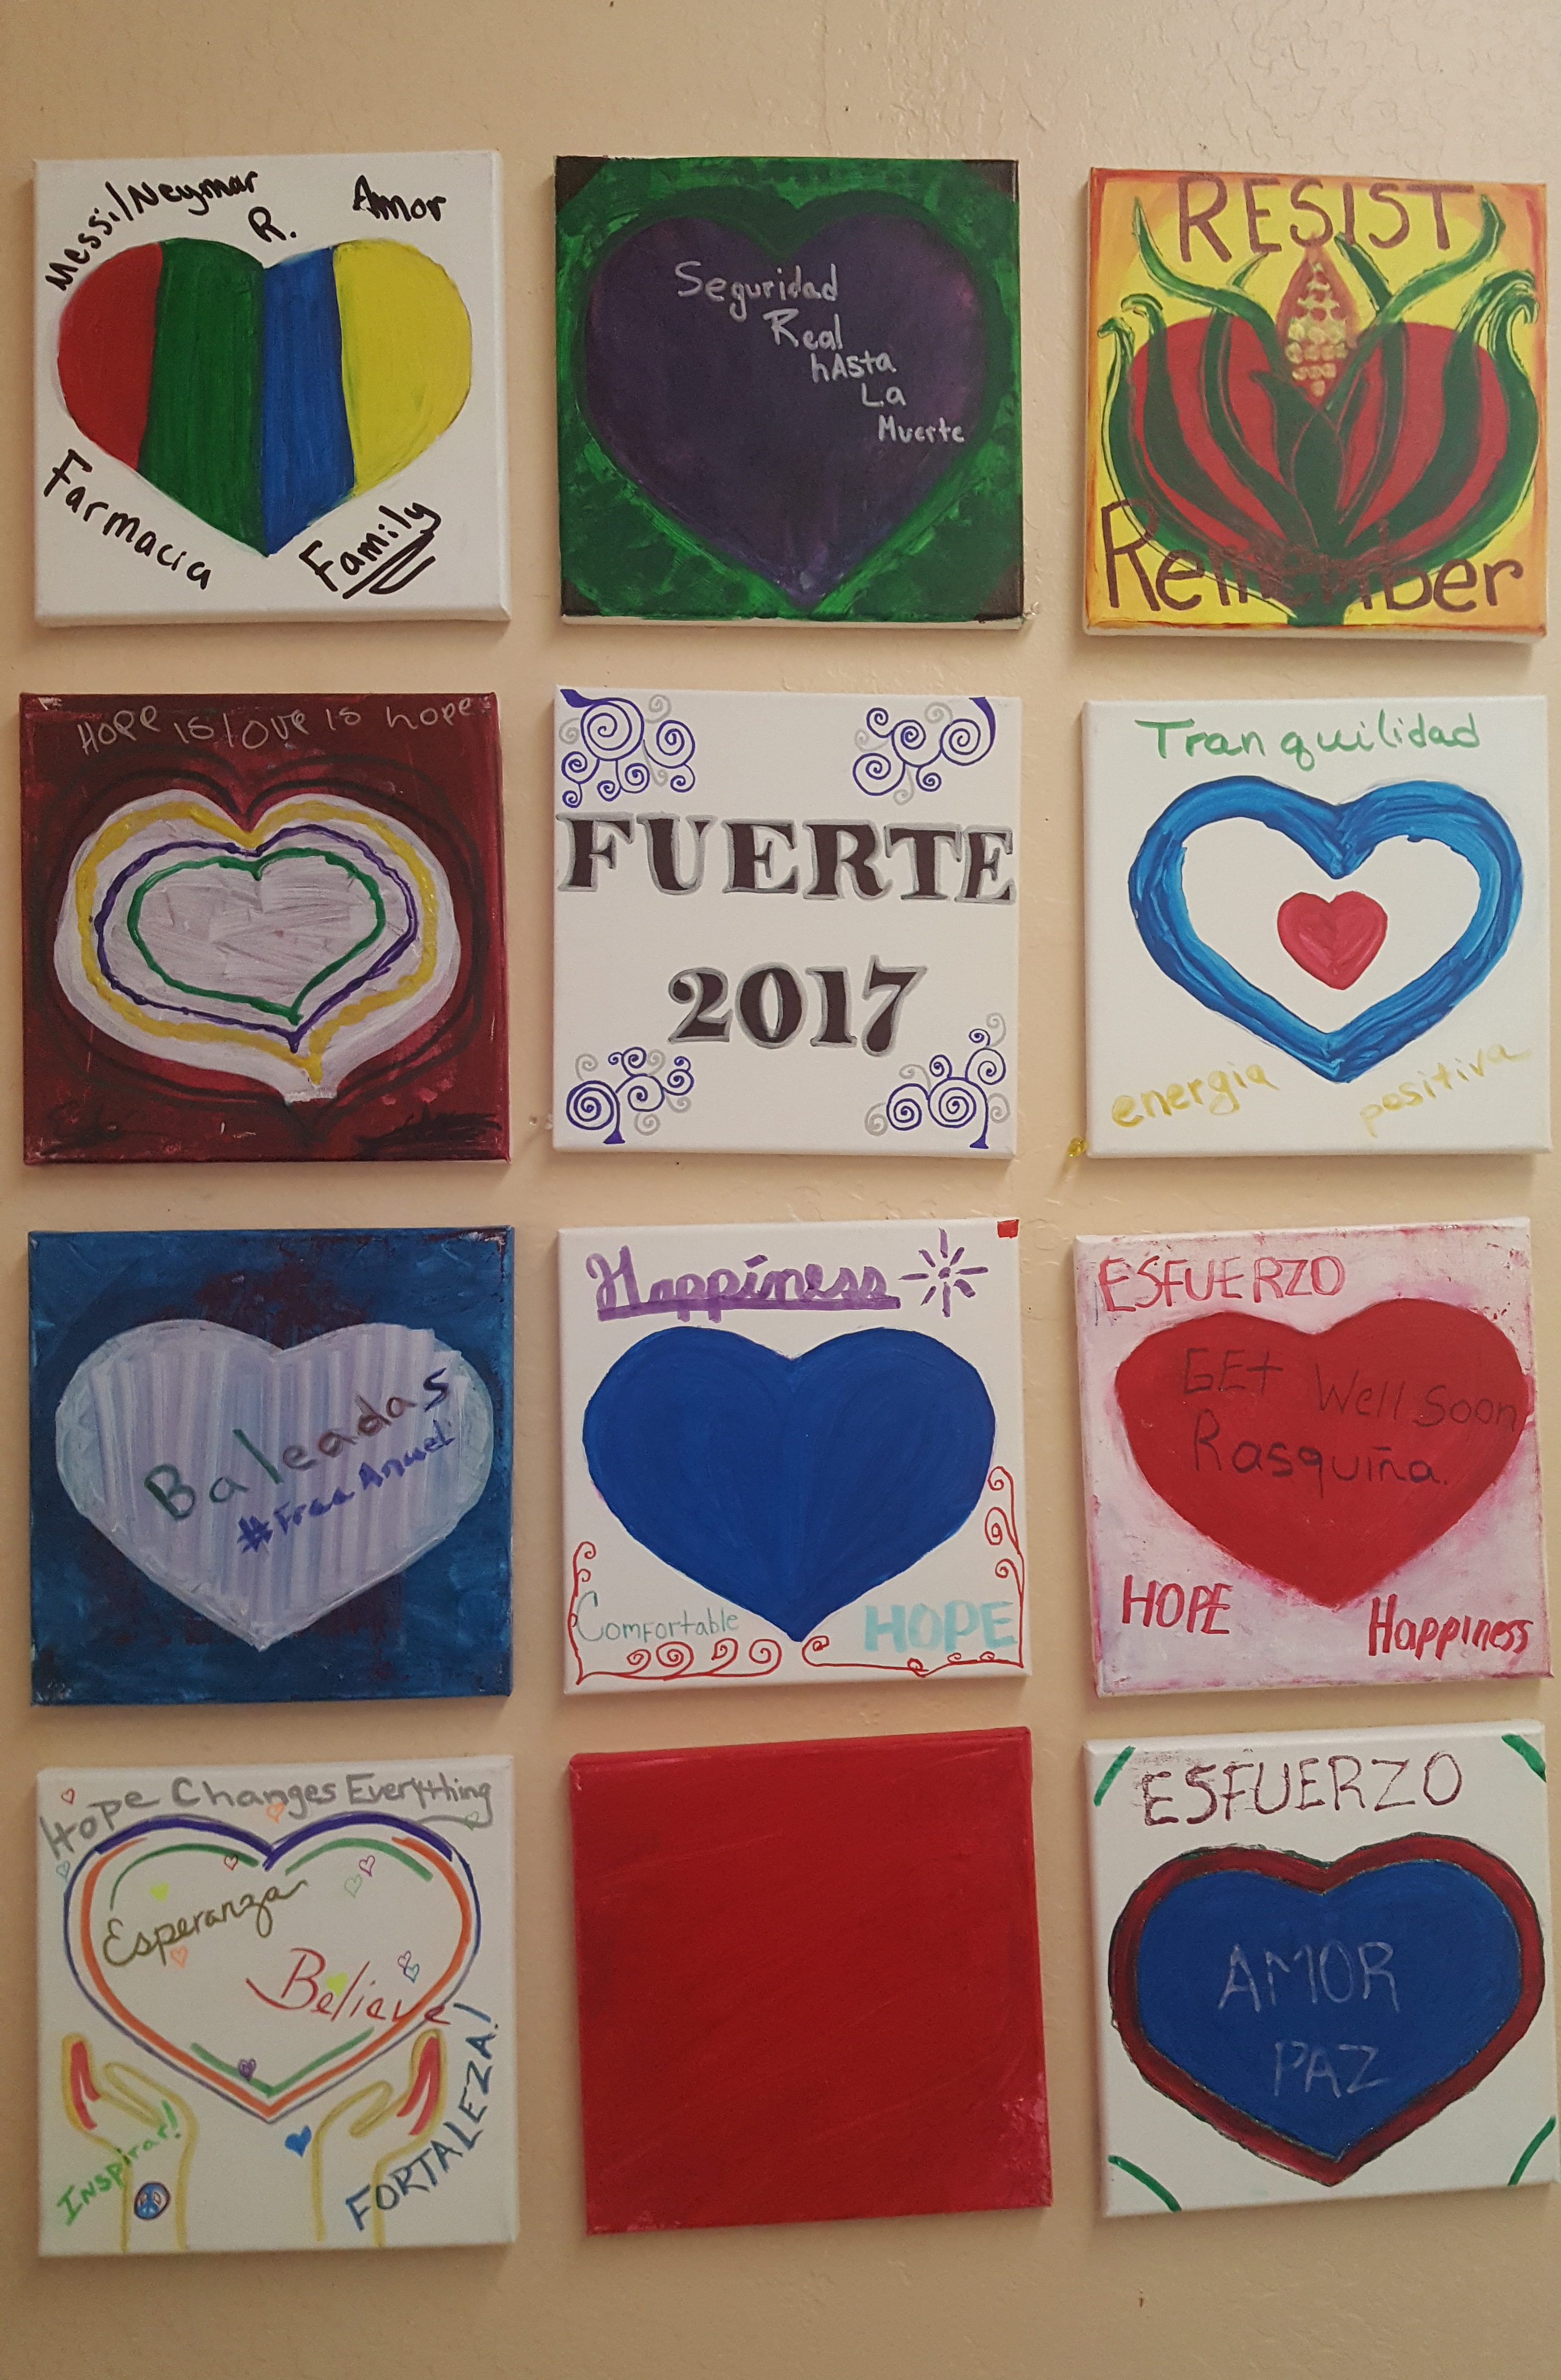 FUERTE:Family Reunification and Resiliency Training